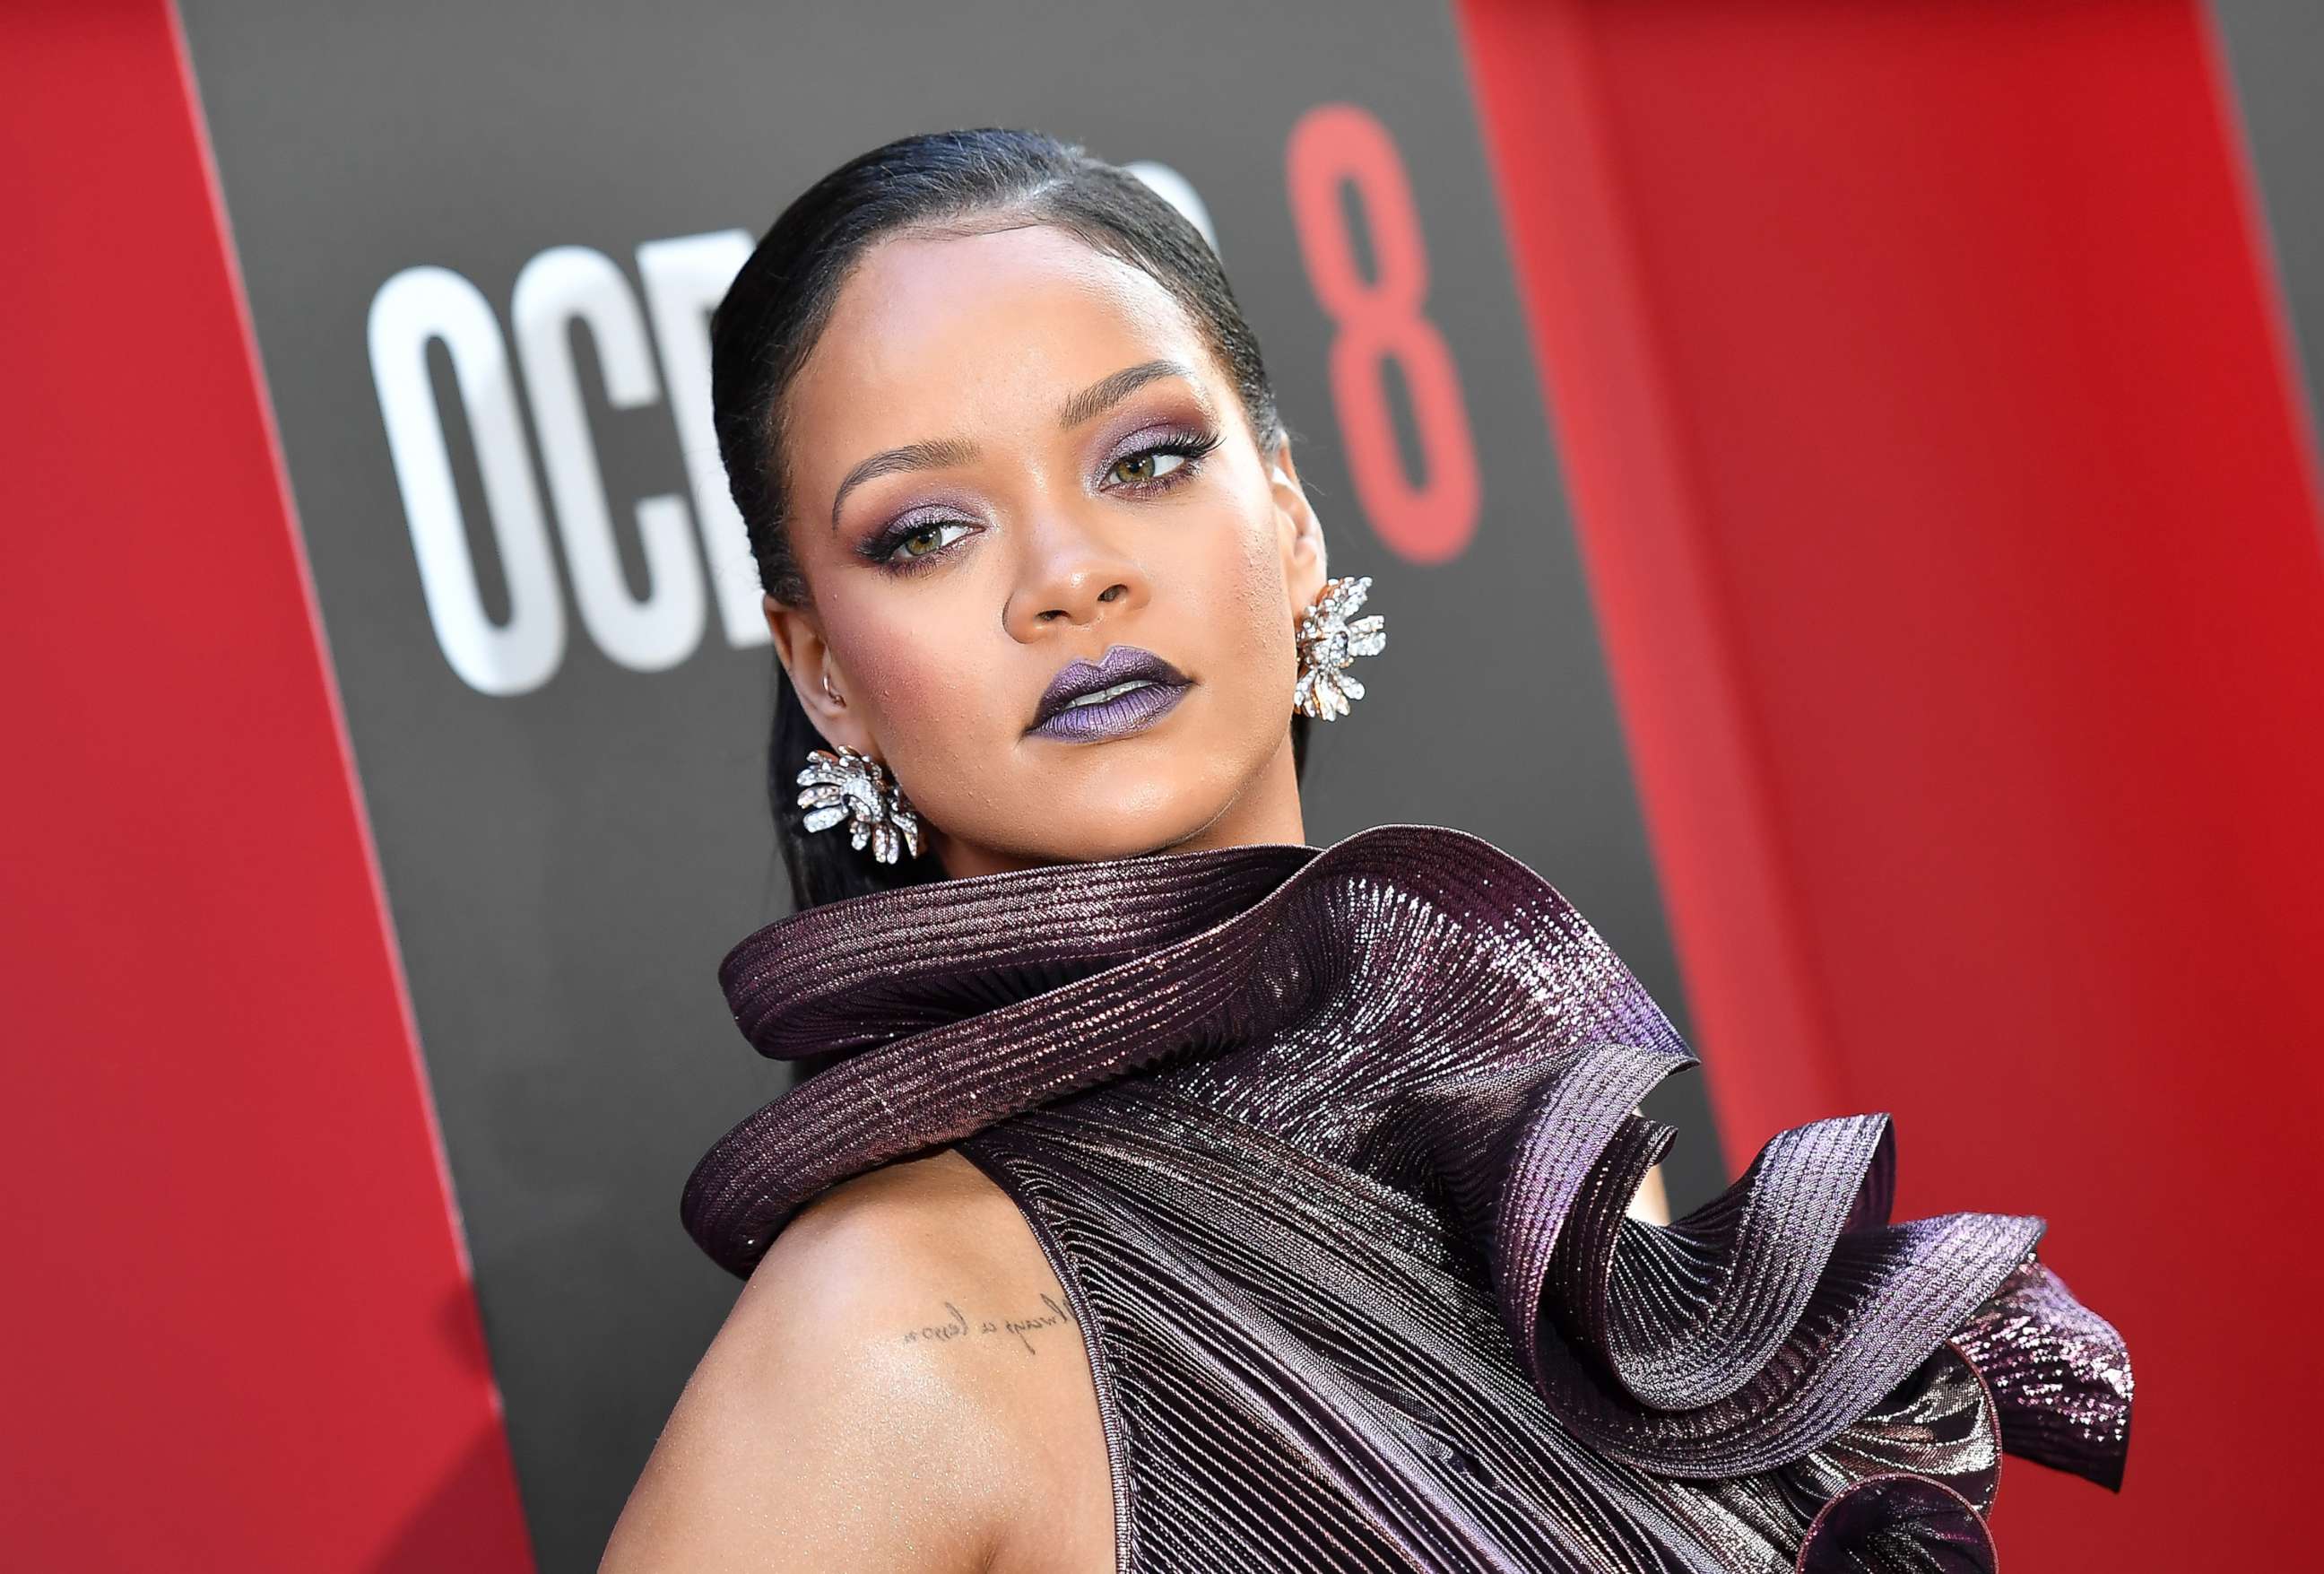 PHOTO: Rihanna arrives for the world premiere of Ocean's 8 on June 5, 2018 in New York.